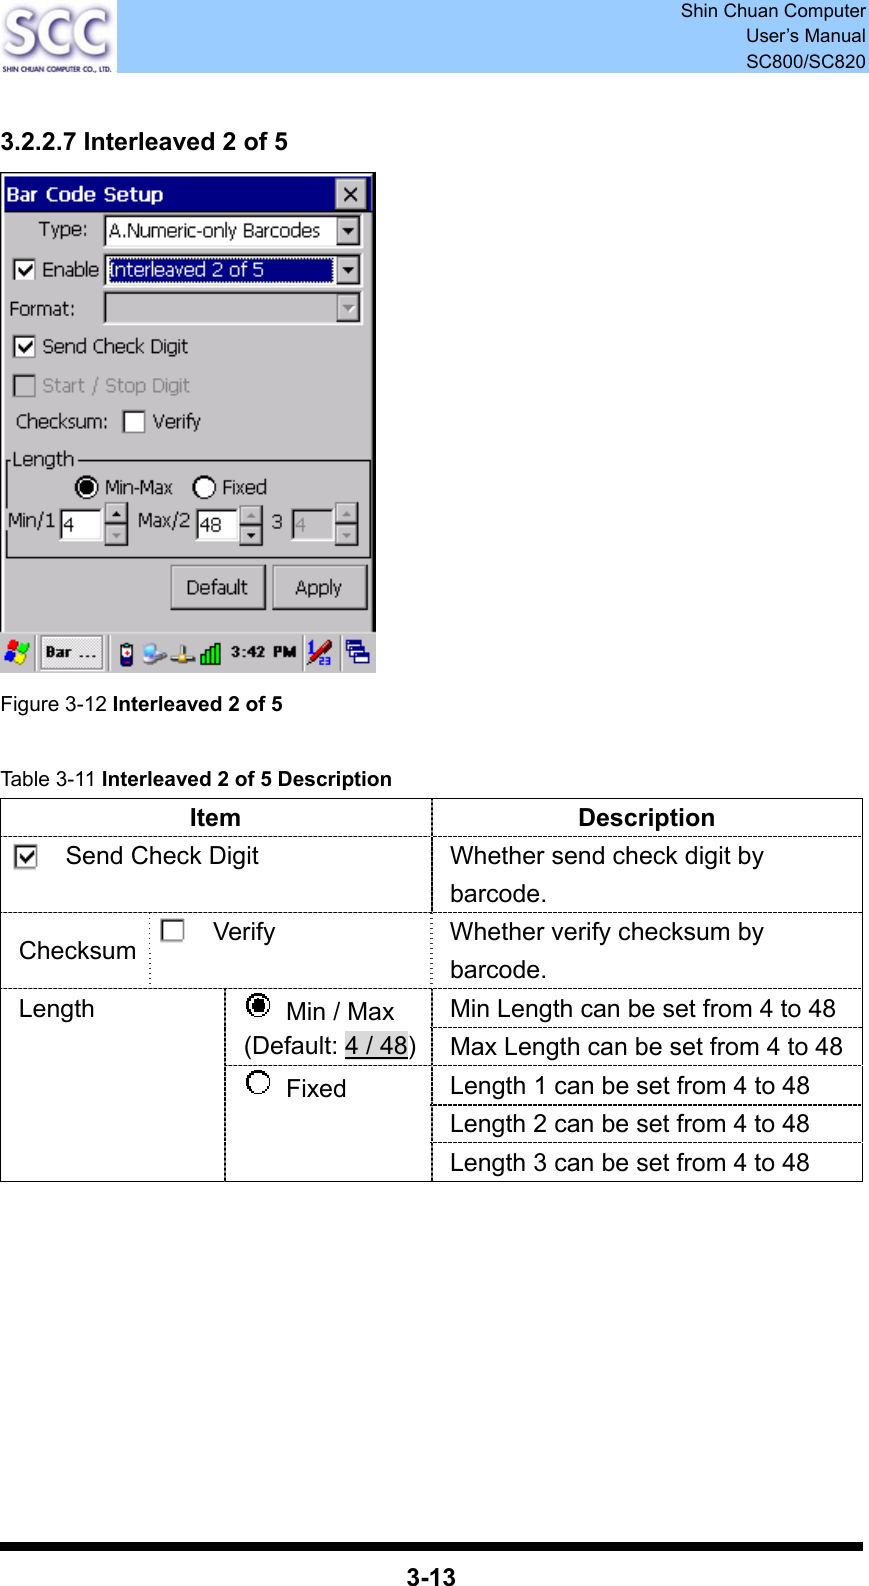  Shin Chuan Computer User’s Manual SC800/SC820  3-13  3.2.2.7 Interleaved 2 of 5  Figure 3-12 Interleaved 2 of 5  Table 3-11 Interleaved 2 of 5 Description Item Description Send Check Digit  Whether send check digit by barcode. Checksum  Verify  Whether verify checksum by barcode. Min Length can be set from 4 to 48   Min / Max (Default: 4 / 48)Max Length can be set from 4 to 48 Length 1 can be set from 4 to 48 Length 2 can be set from 4 to 48 Length  Fixed Length 3 can be set from 4 to 48         